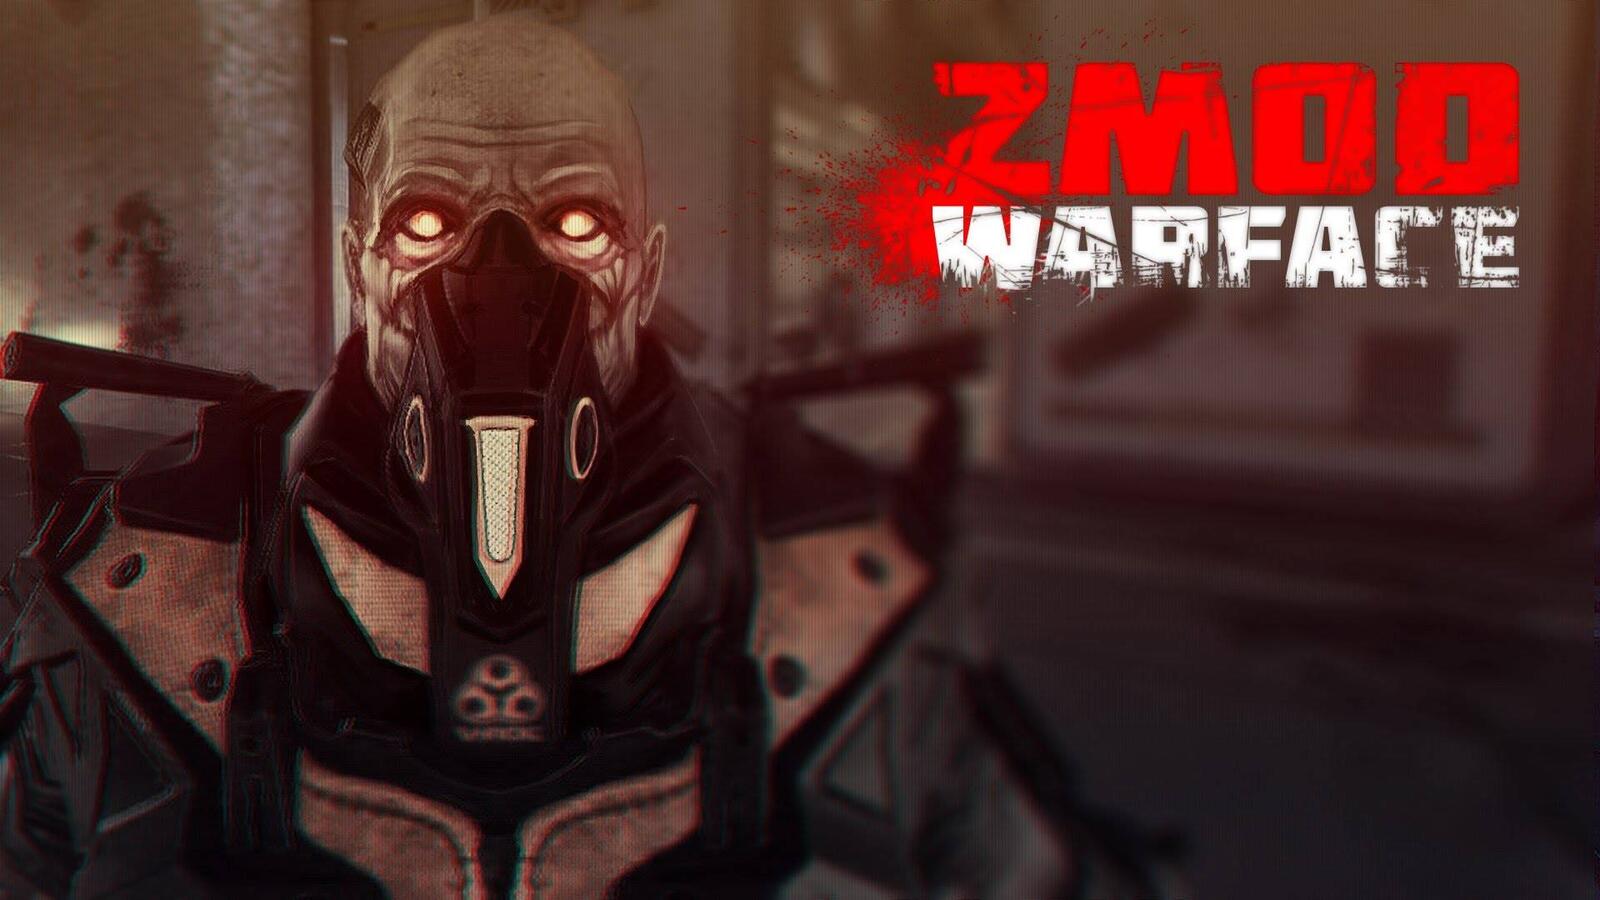 Wallpapers warface zombies mission on the desktop